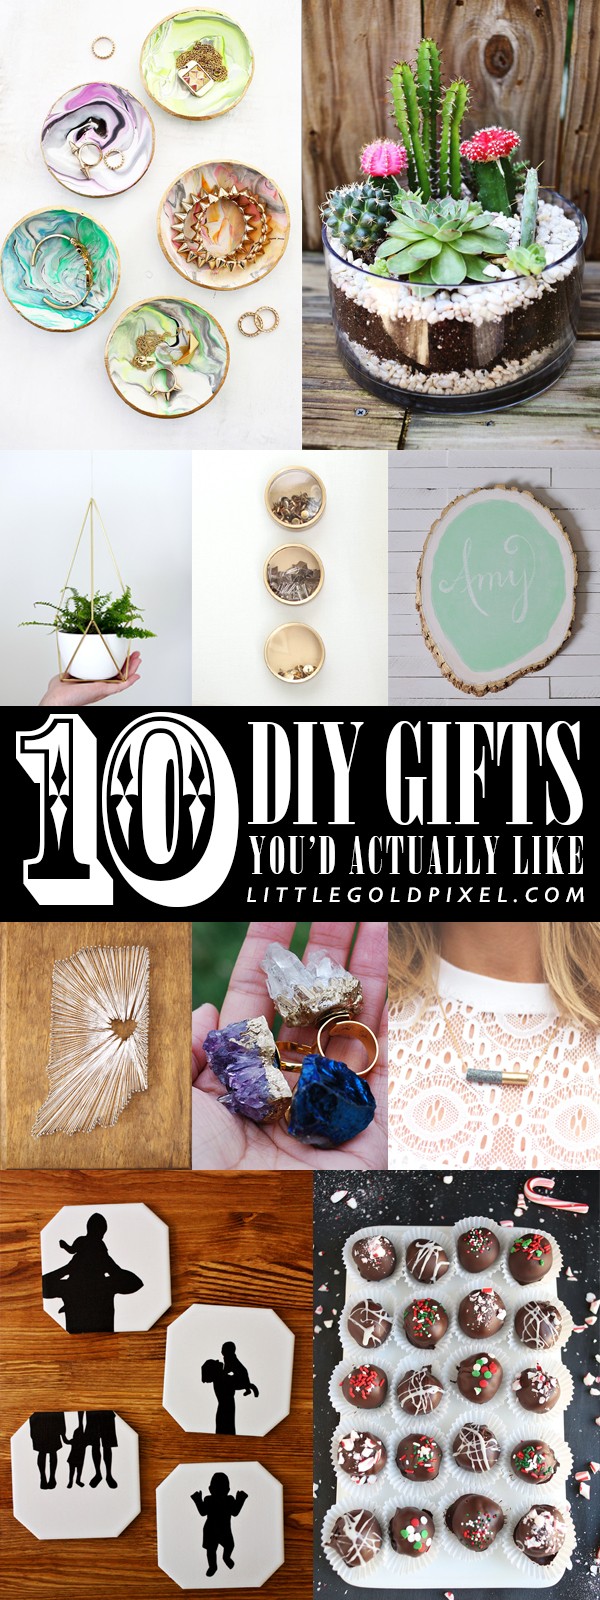 10 DIY Gifts You'll Actually Like • littlegoldpixel • Handmade gifts that won't make your loved ones cringe on the inside